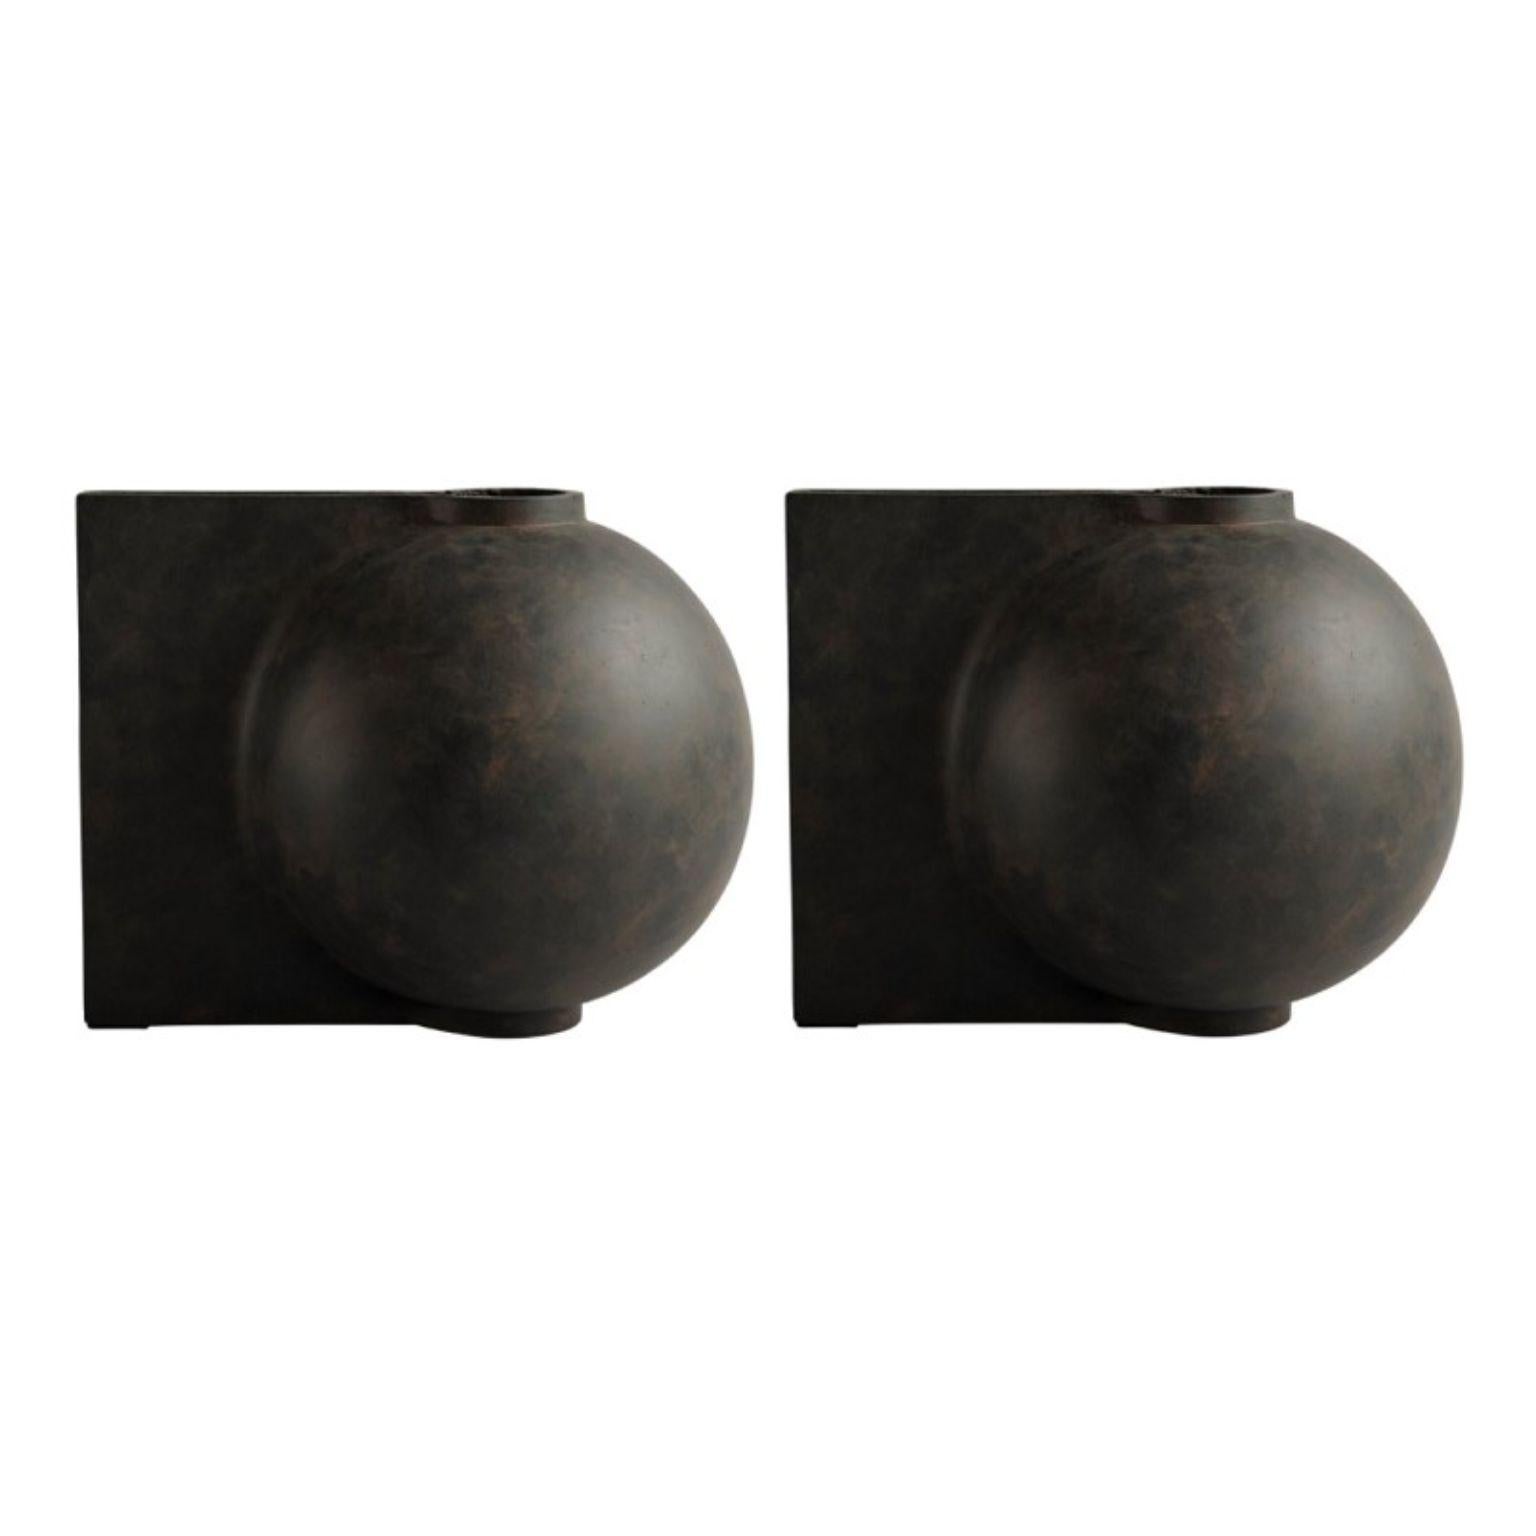 Set of 2 coffee offset vases big by 101 Copenhagen.
Designed by Nicolaj Nøddesbo & Tommy Hyldahl.
Dimensions: L 60 / W 40 / H 48 cm.
Materials: fiber concrete.

Offset is designed as a distortion of a historical vase shape, offset challenges